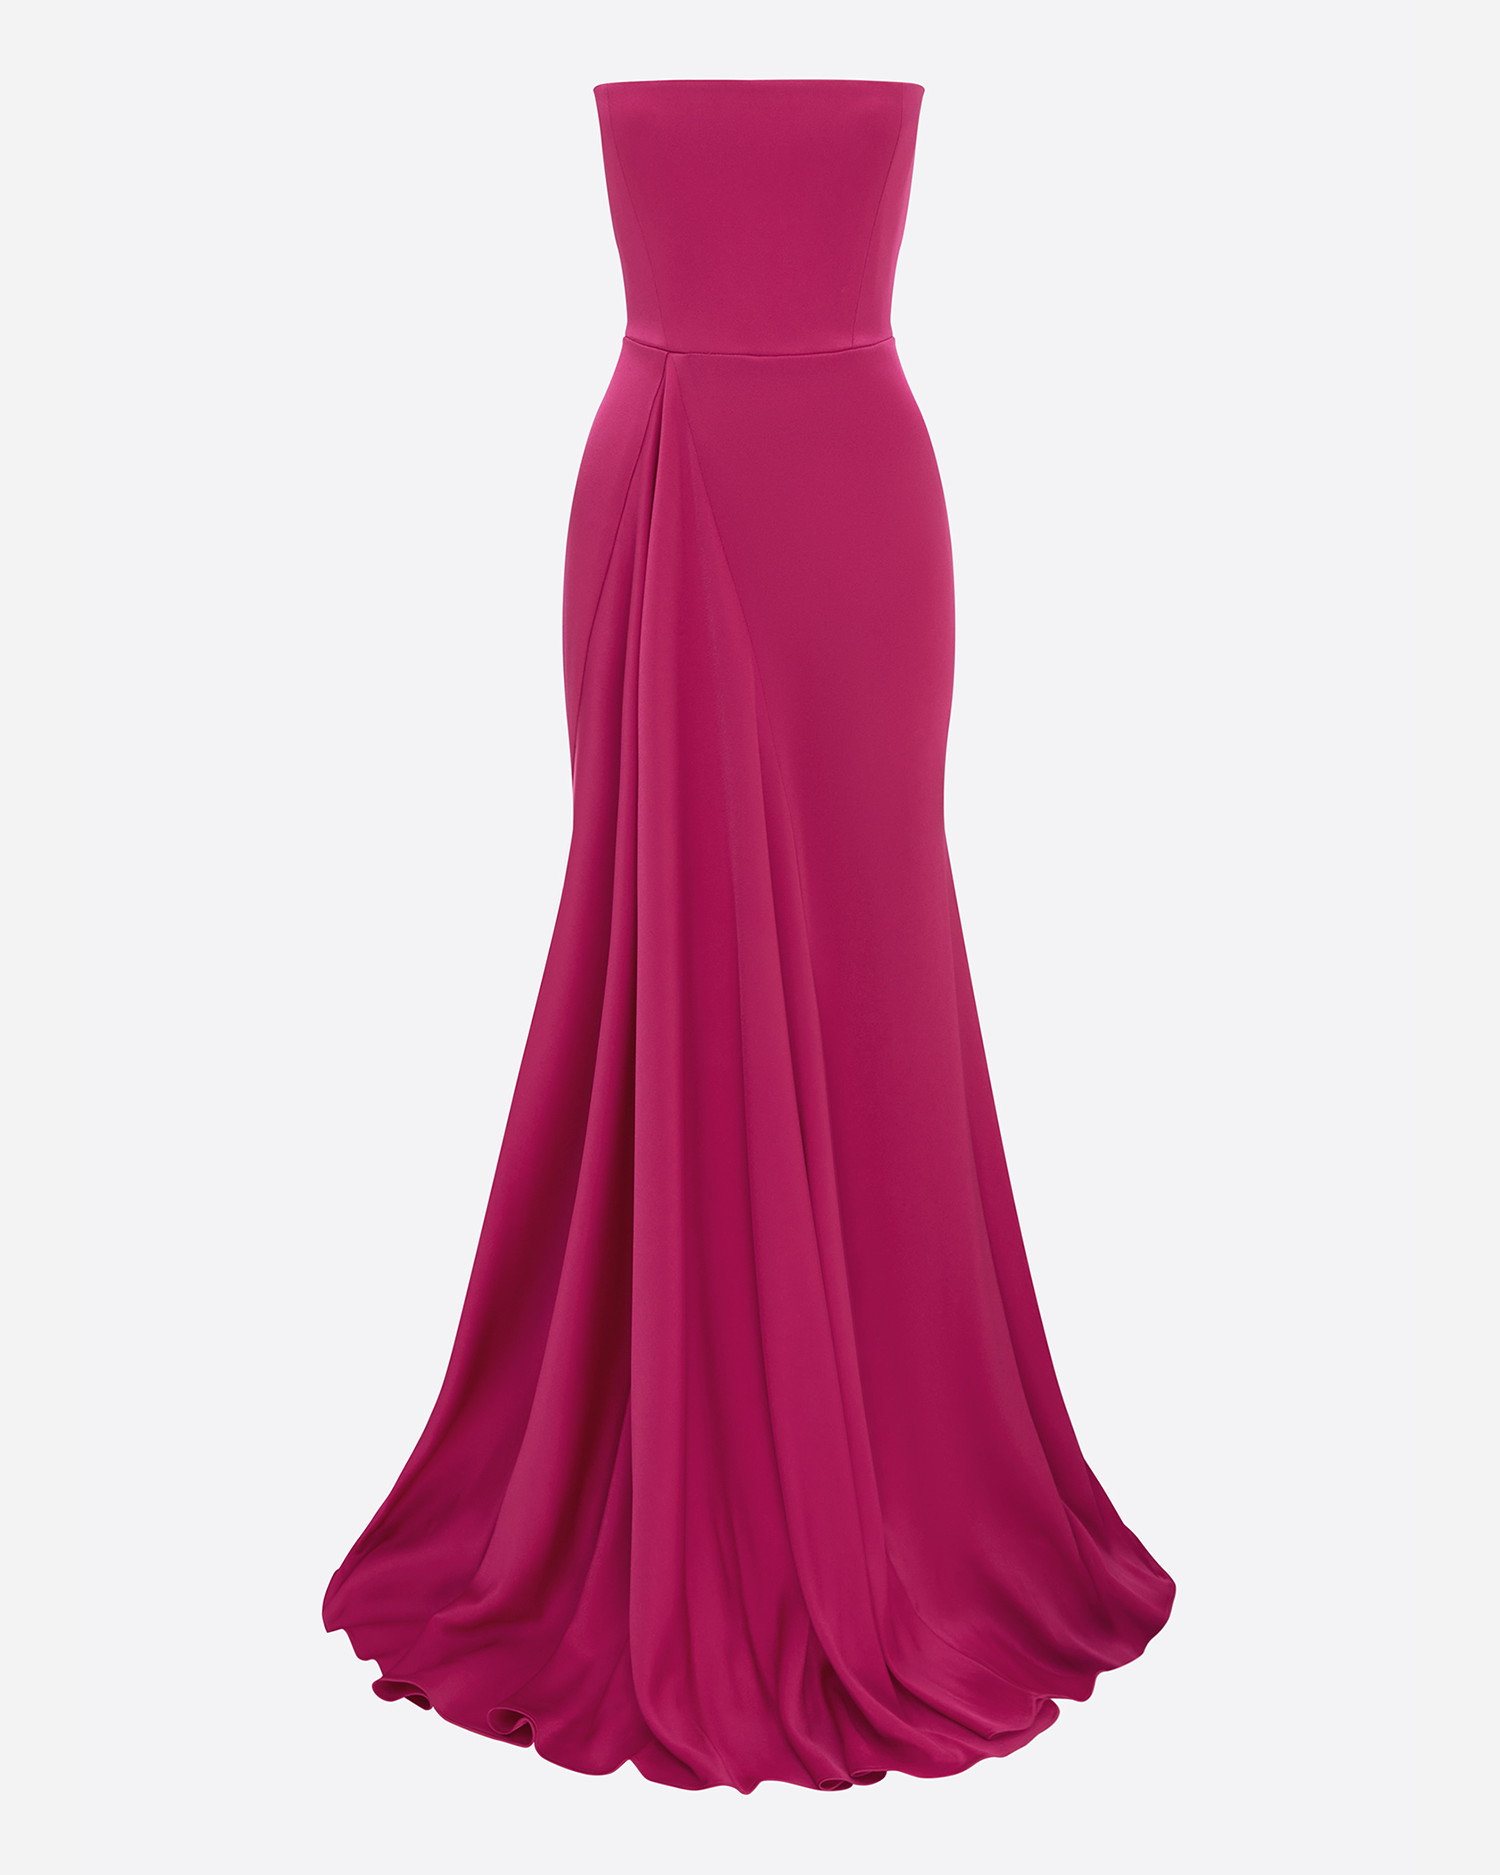 Strapless Gathered Drape Gown in Satin Crepe